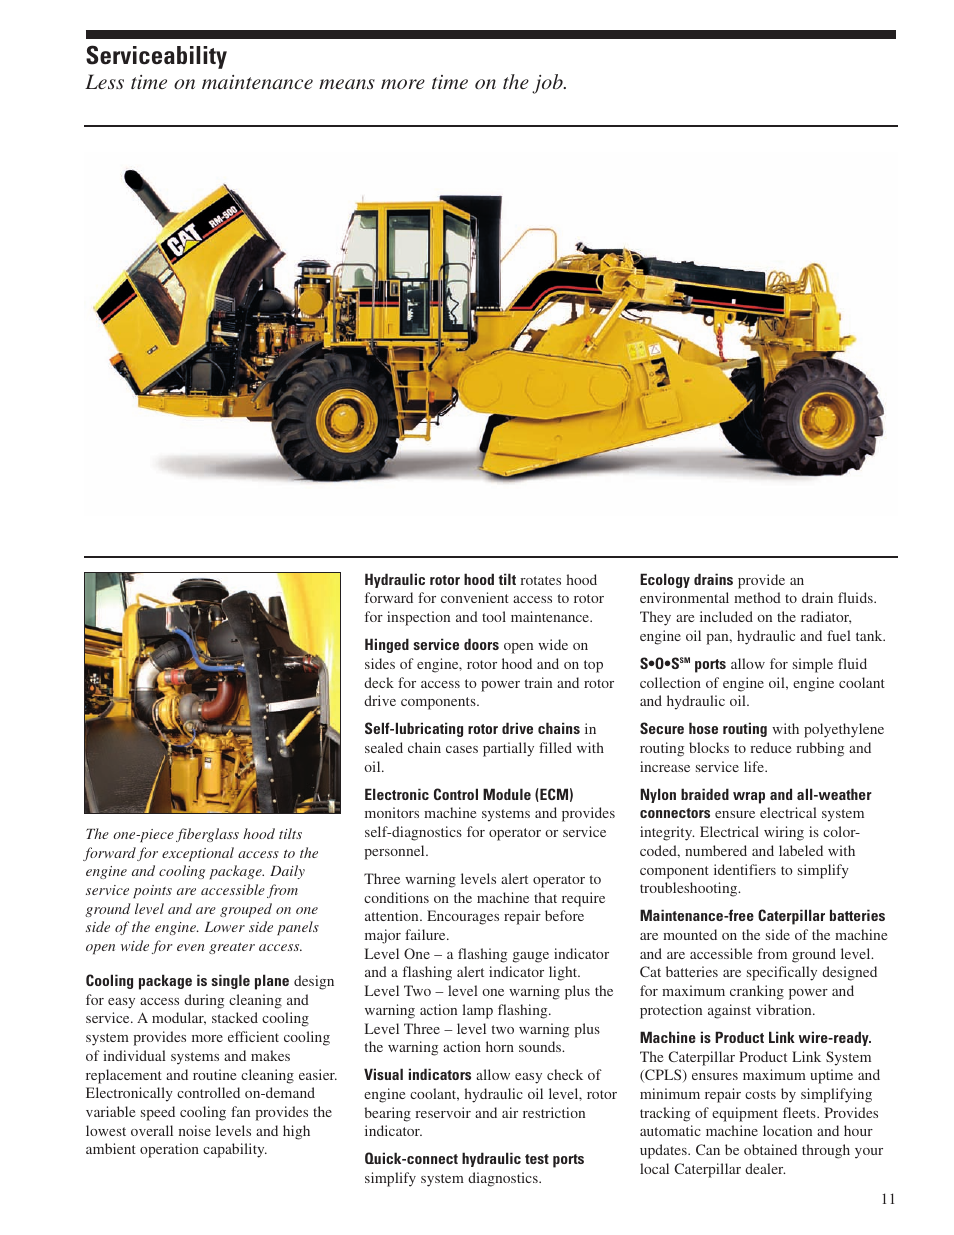 Serviceability Milton CAT RM 500 User Manual Page 11 / 16